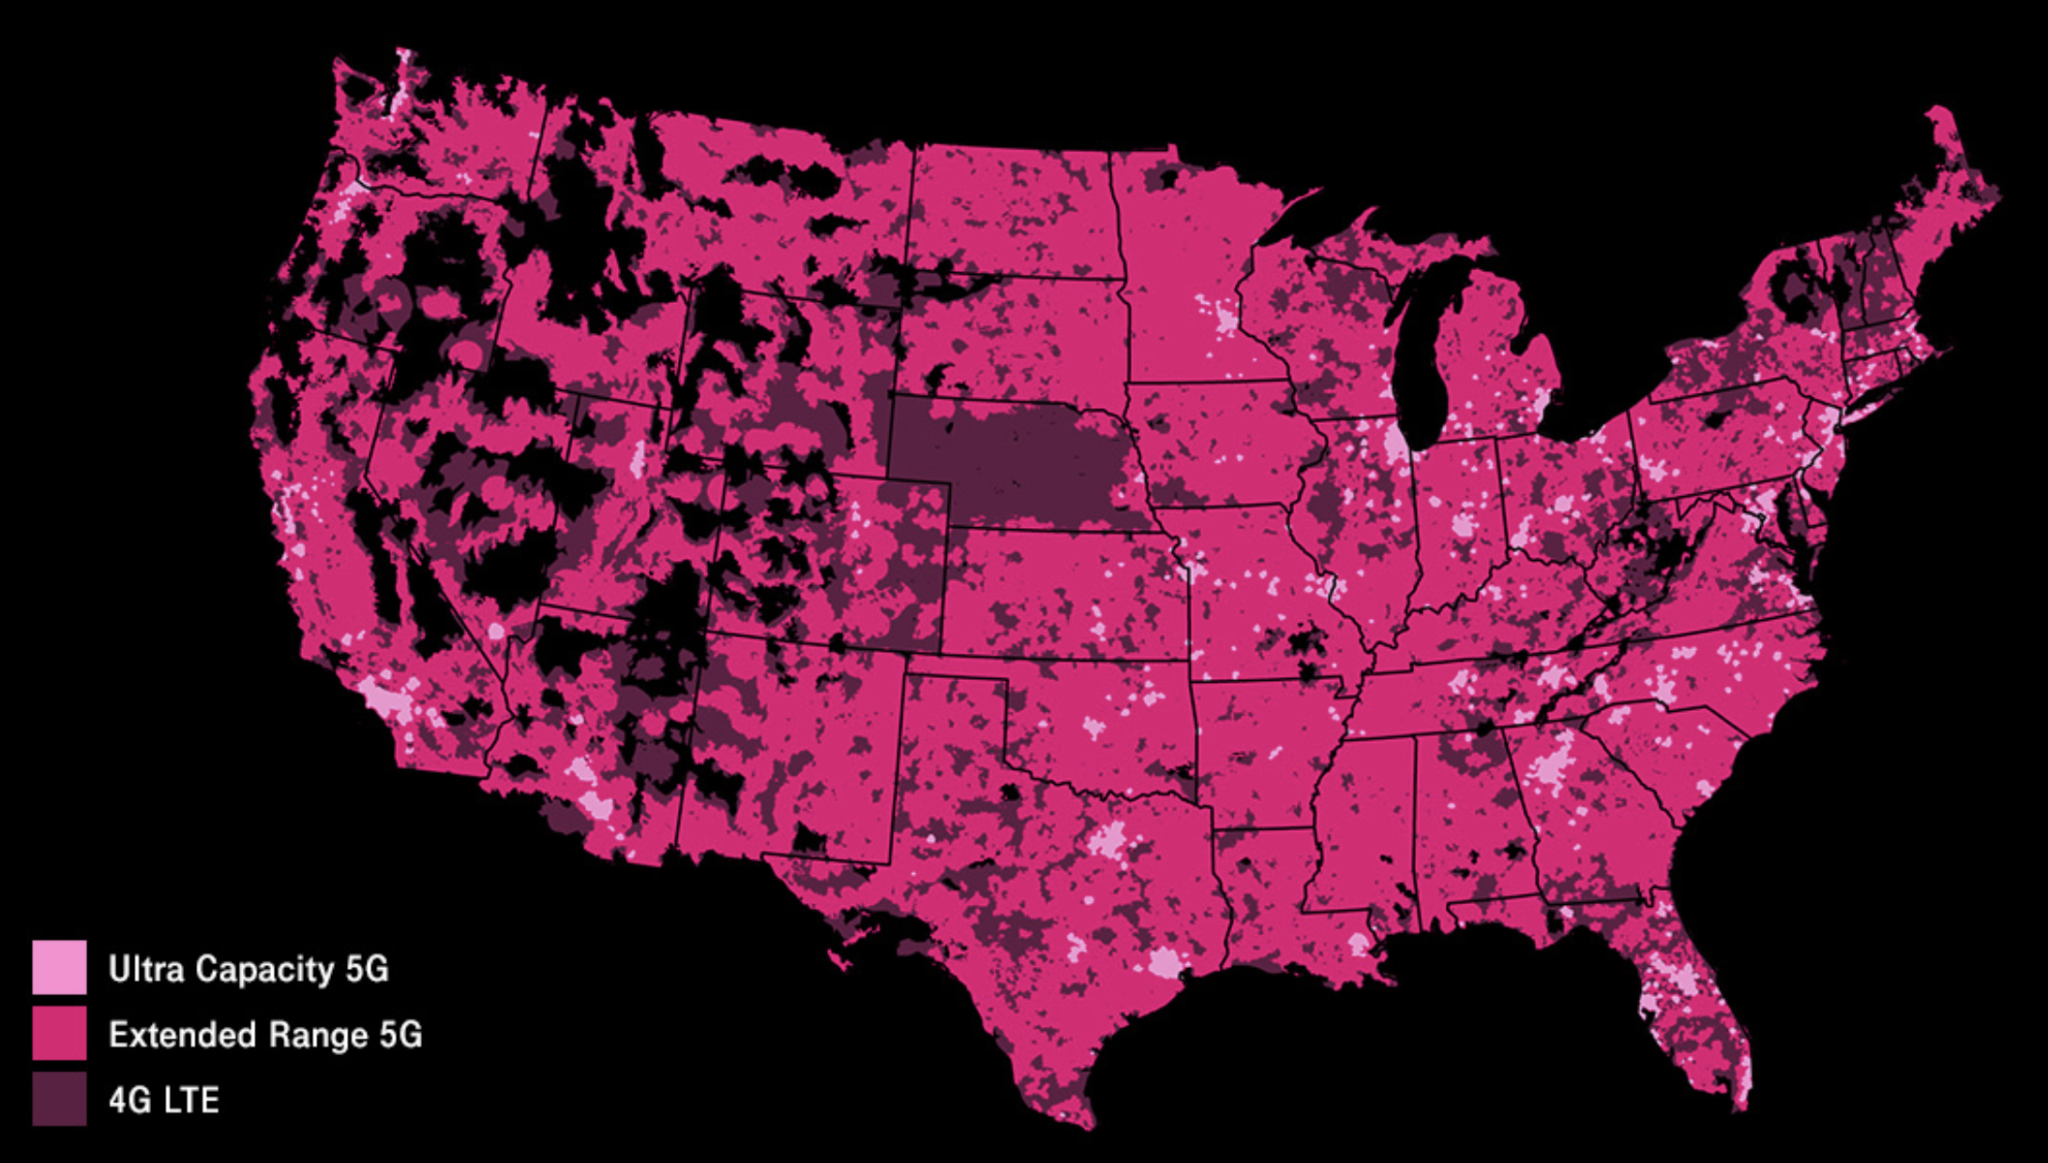 T-Mobile Launches New Data-Only Plans & Inseego 5G MiFi M2000 Mobile